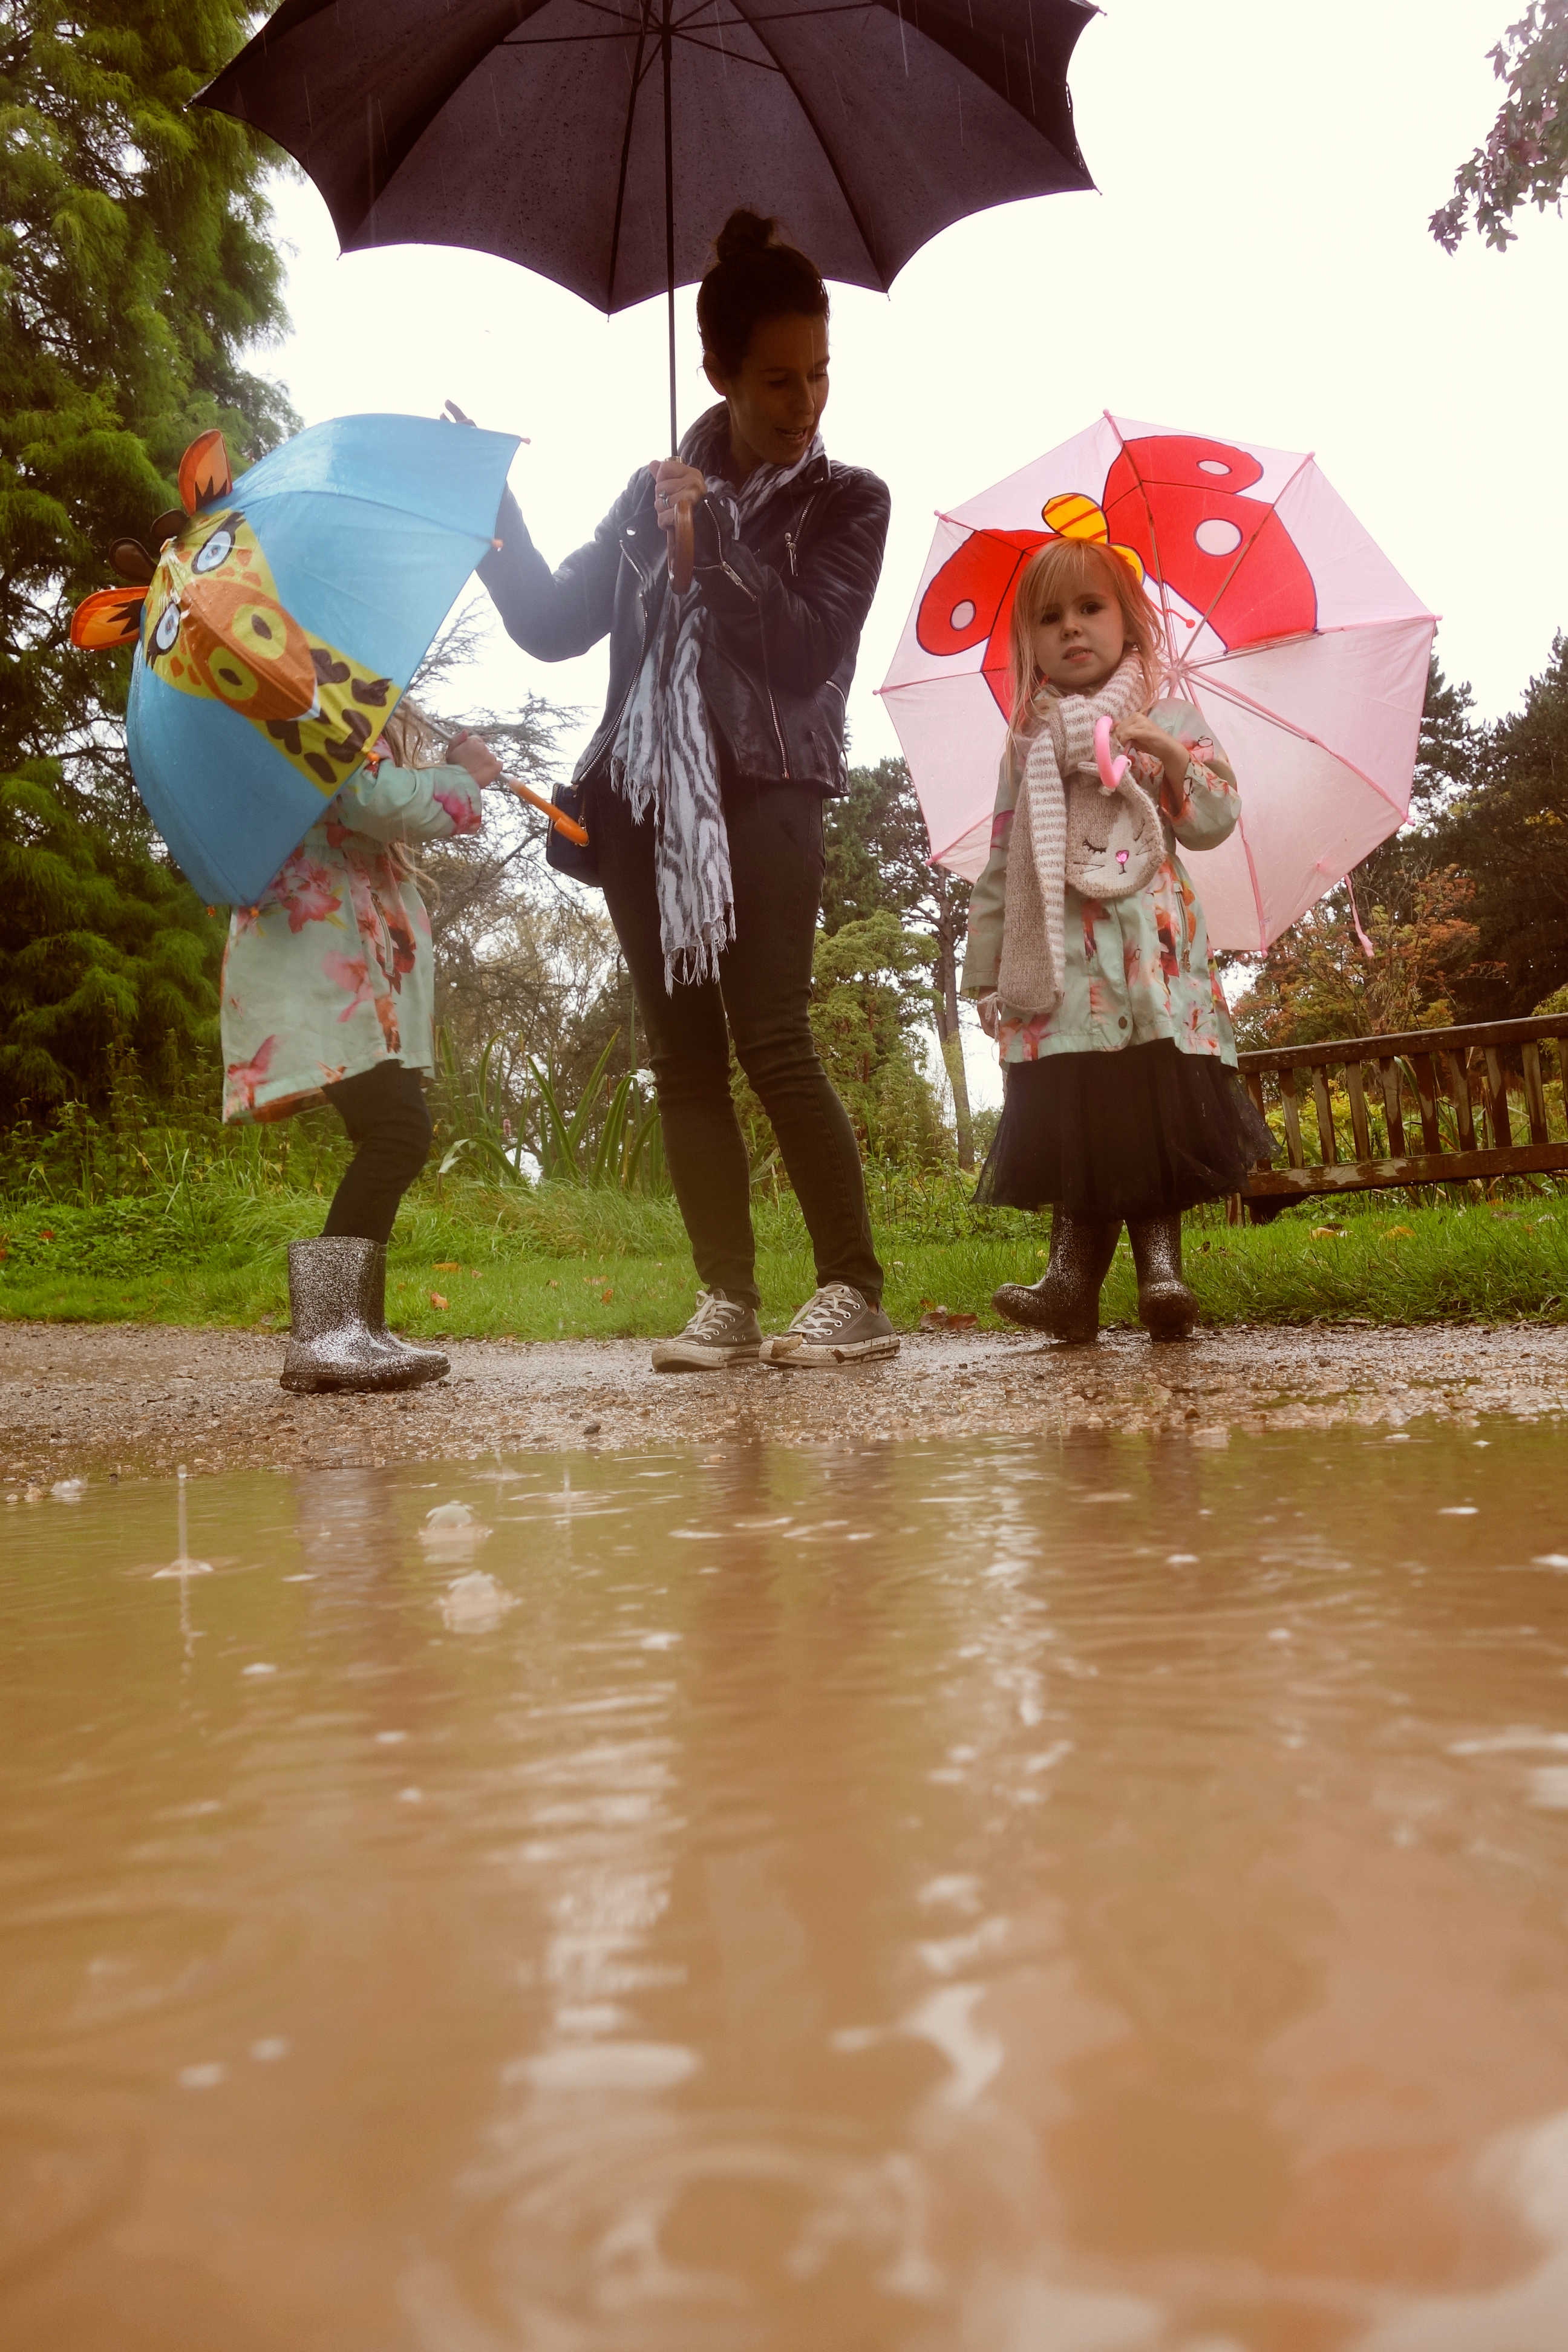 Me and my girls in the rain